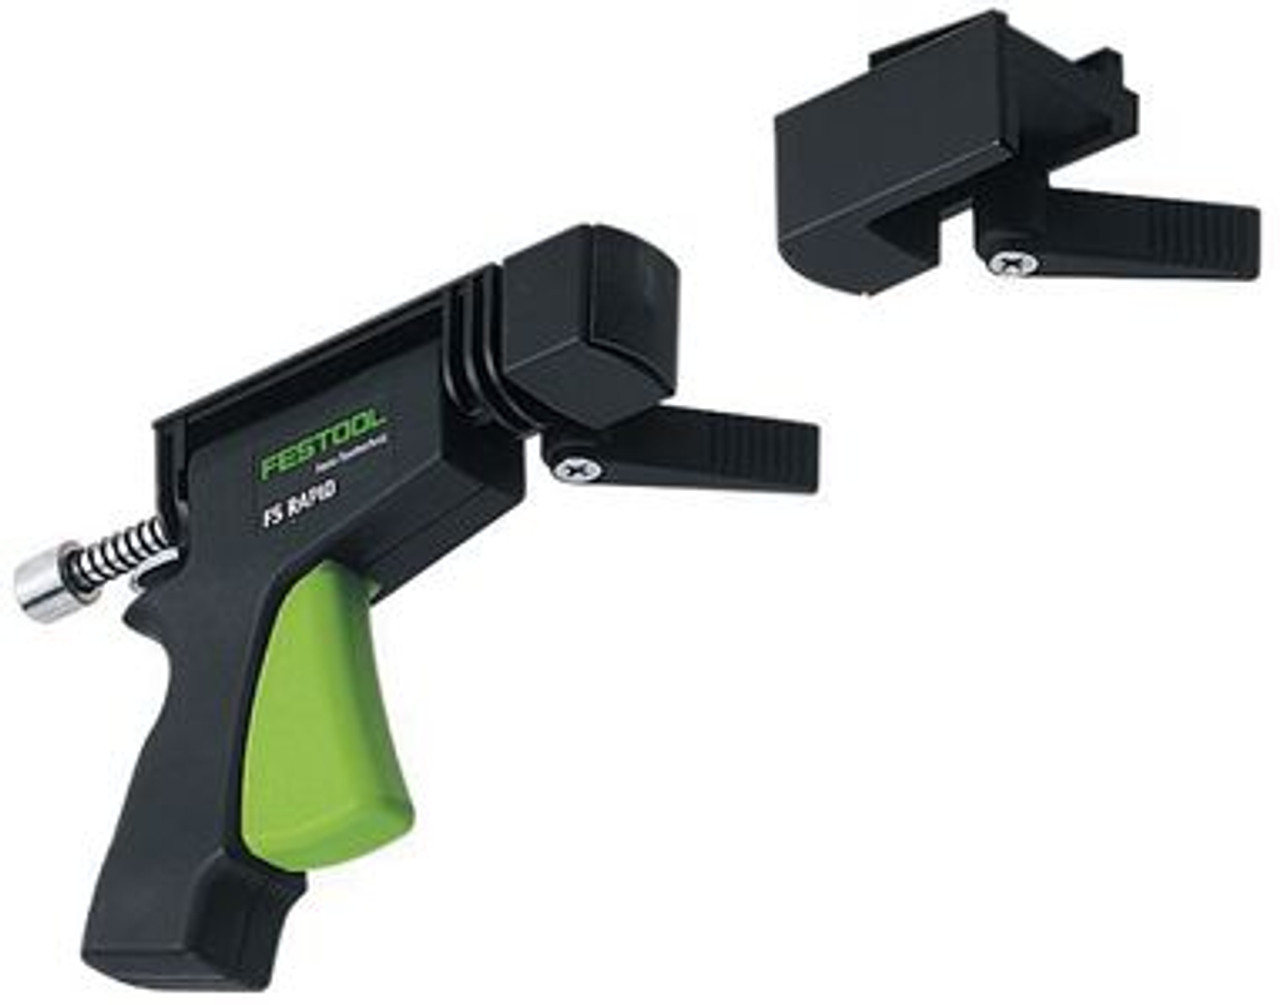 Festool Fs-rapid Clamp And Fixed Jaws For Festool Guide Rail System (489790)